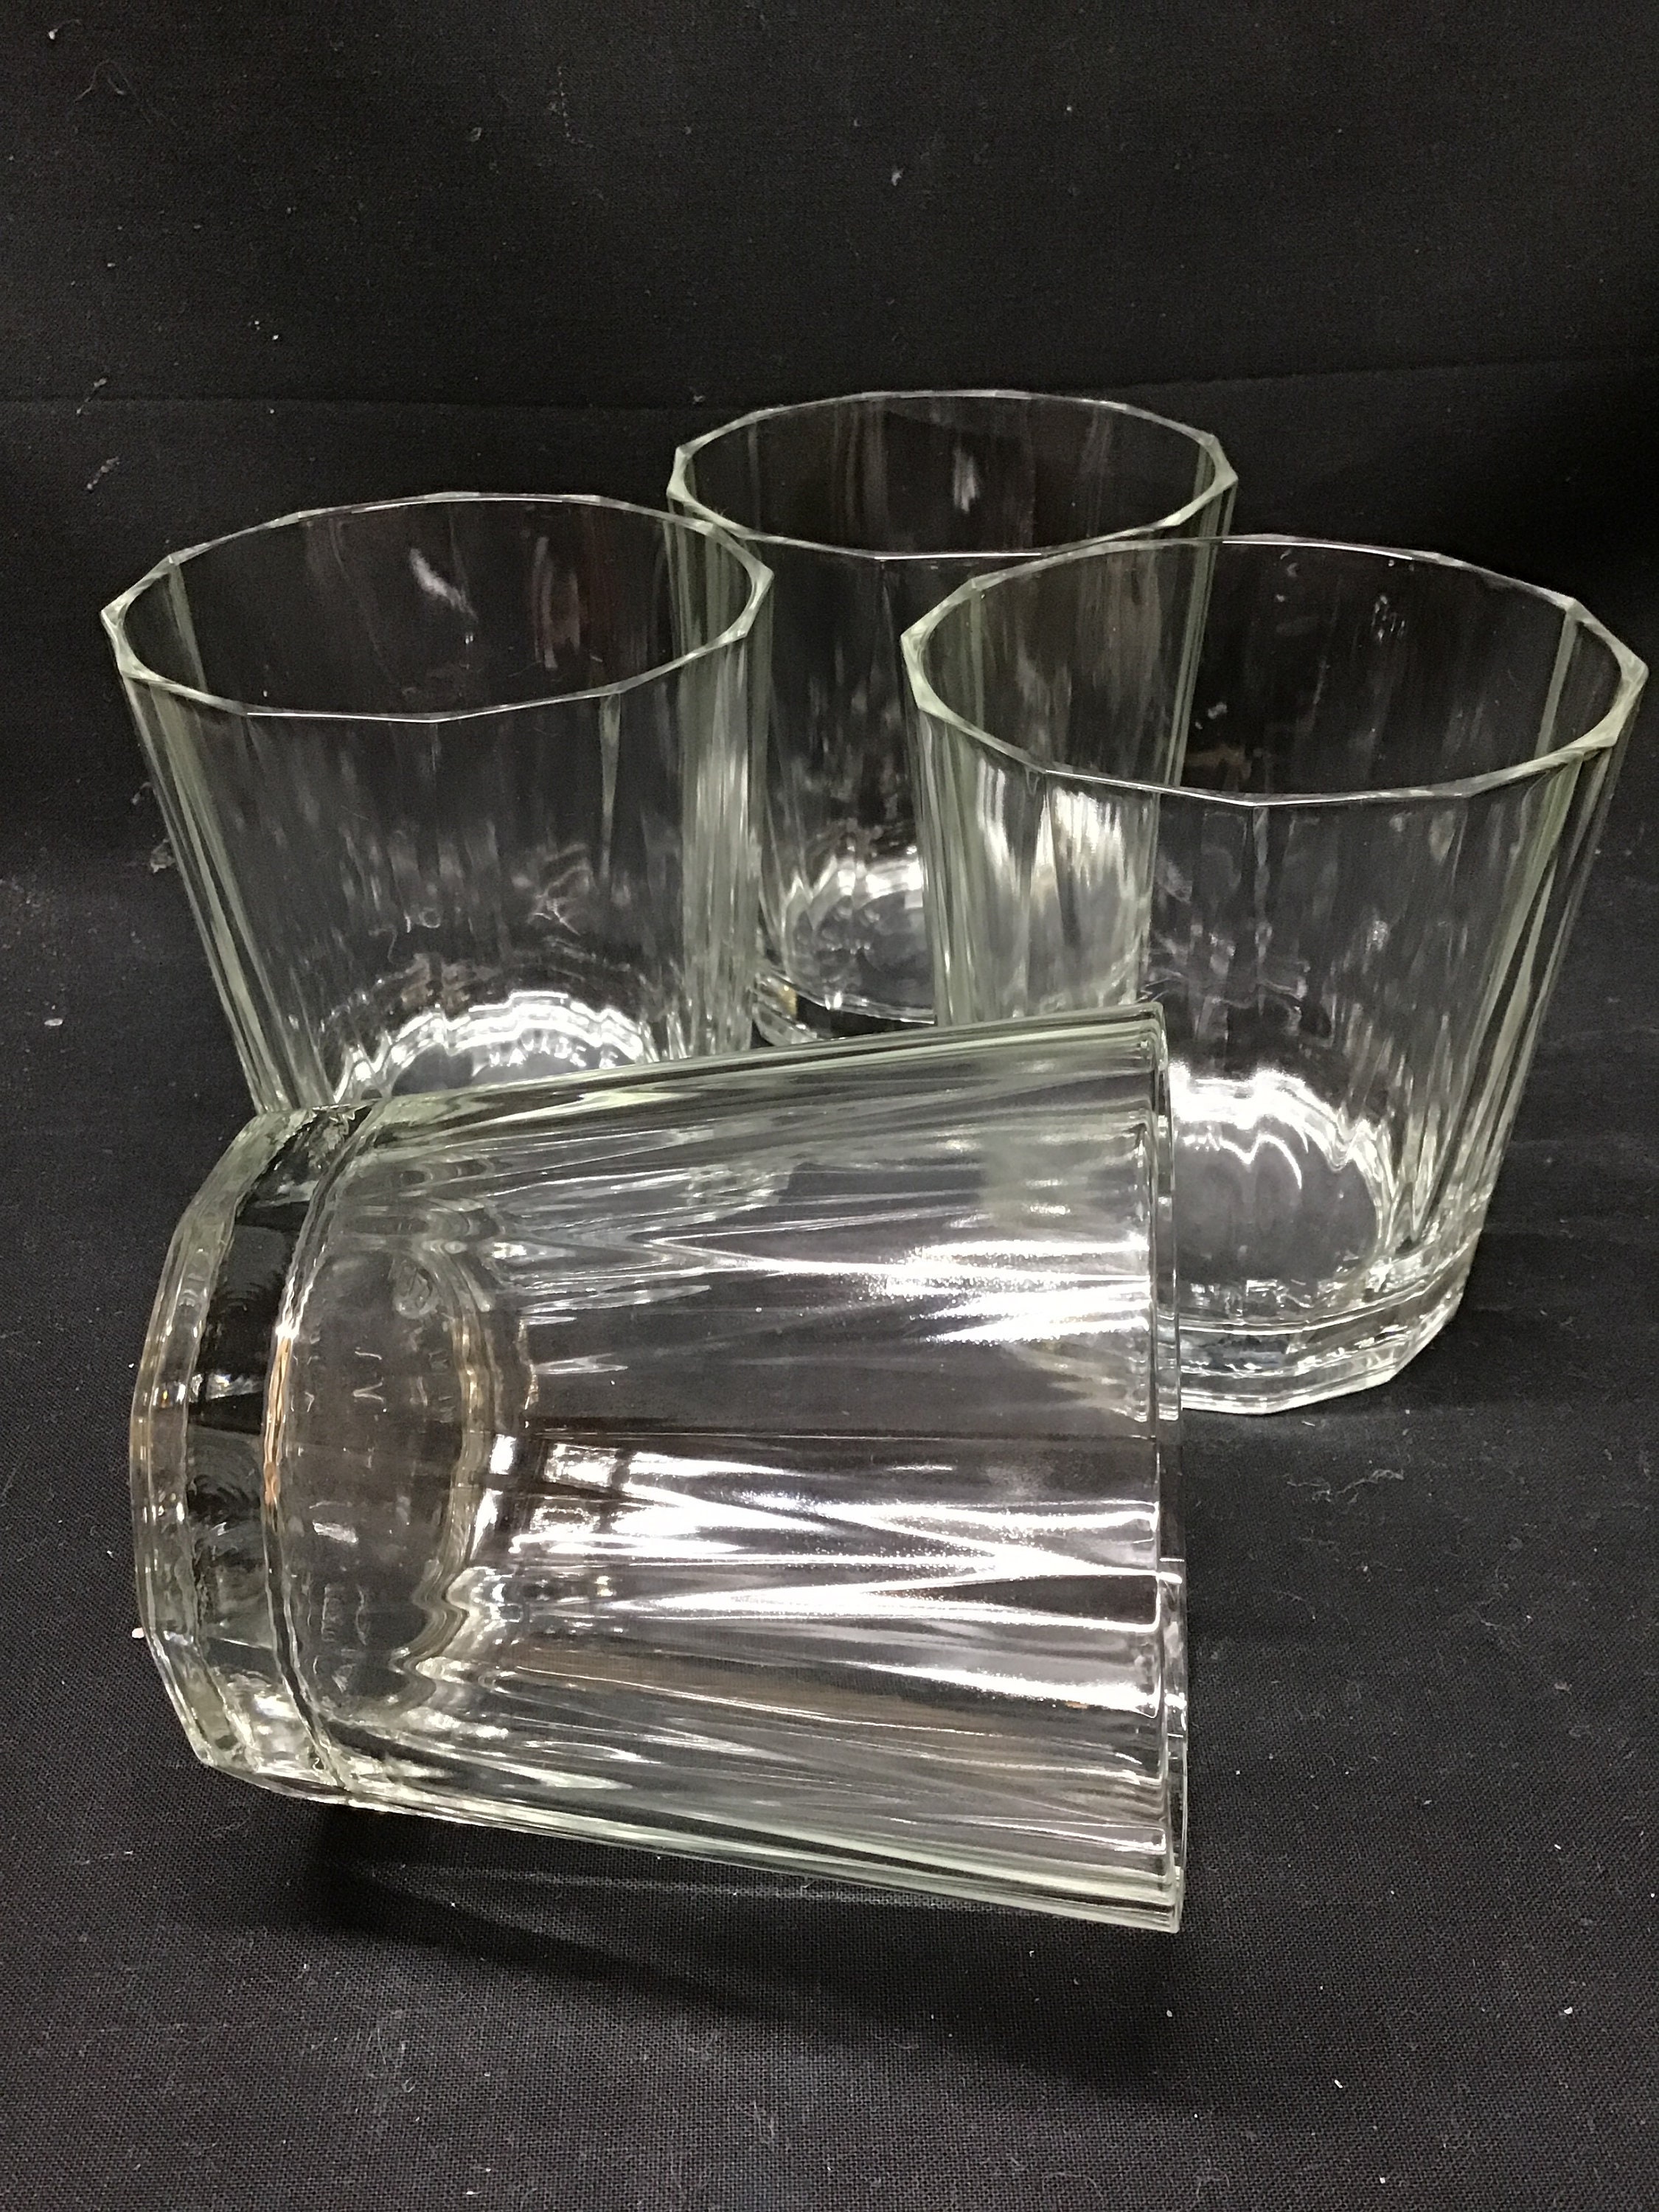 BOICHU Ribbed Glassware Set of 4, Ribbed Glass Cups with Lids and Straws -  Vintage Ribbed Drinking G…See more BOICHU Ribbed Glassware Set of 4, Ribbed